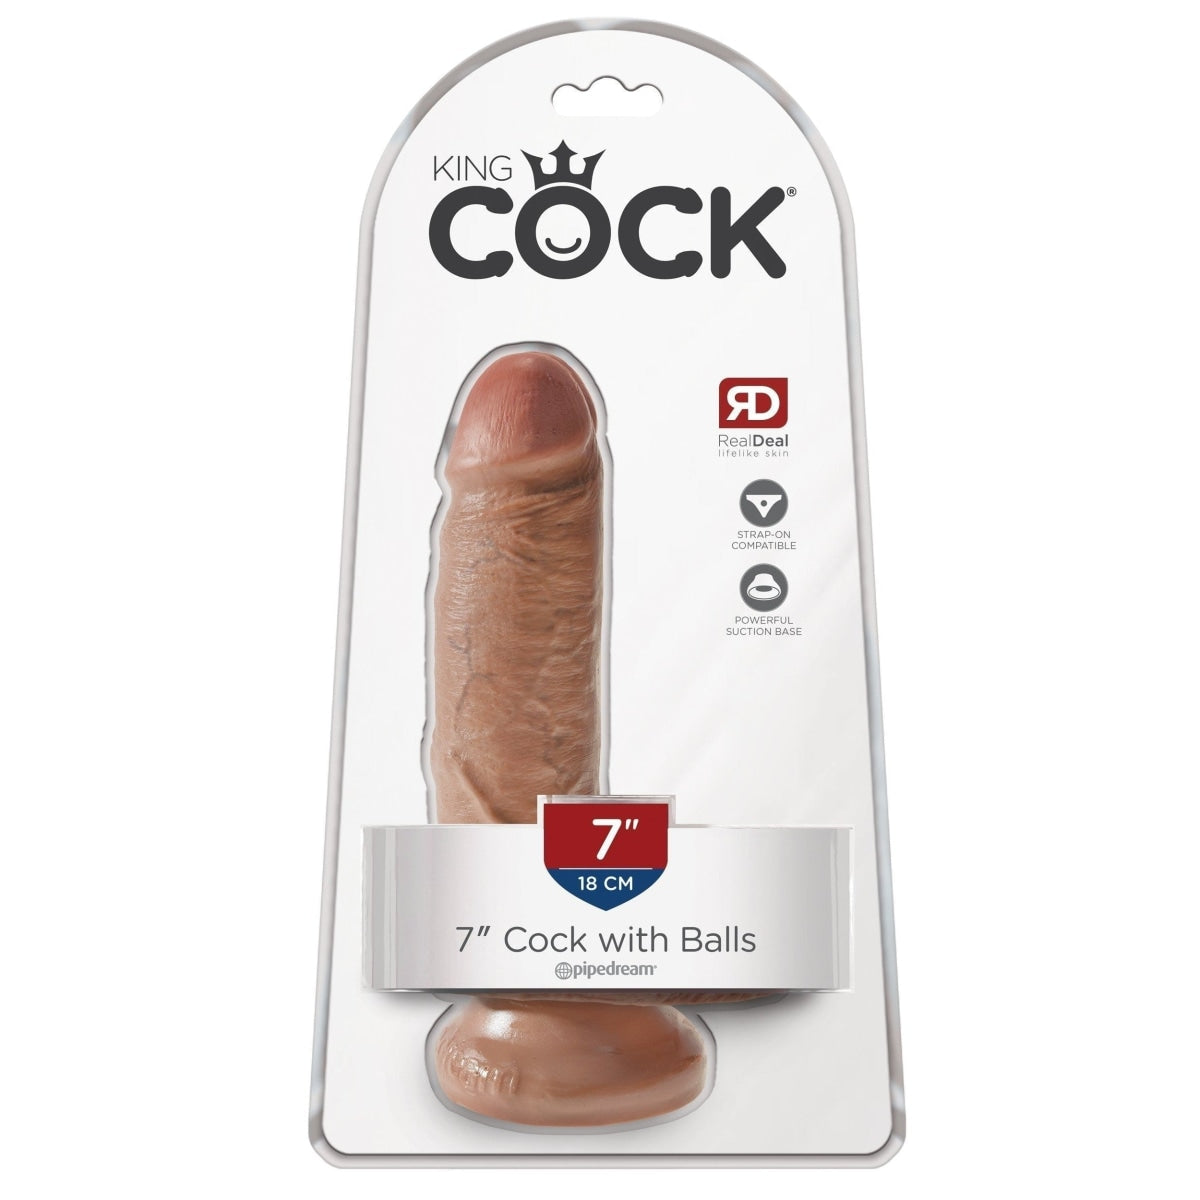 King Cock 7 In Cock W-balls Tan Intimates Adult Boutique